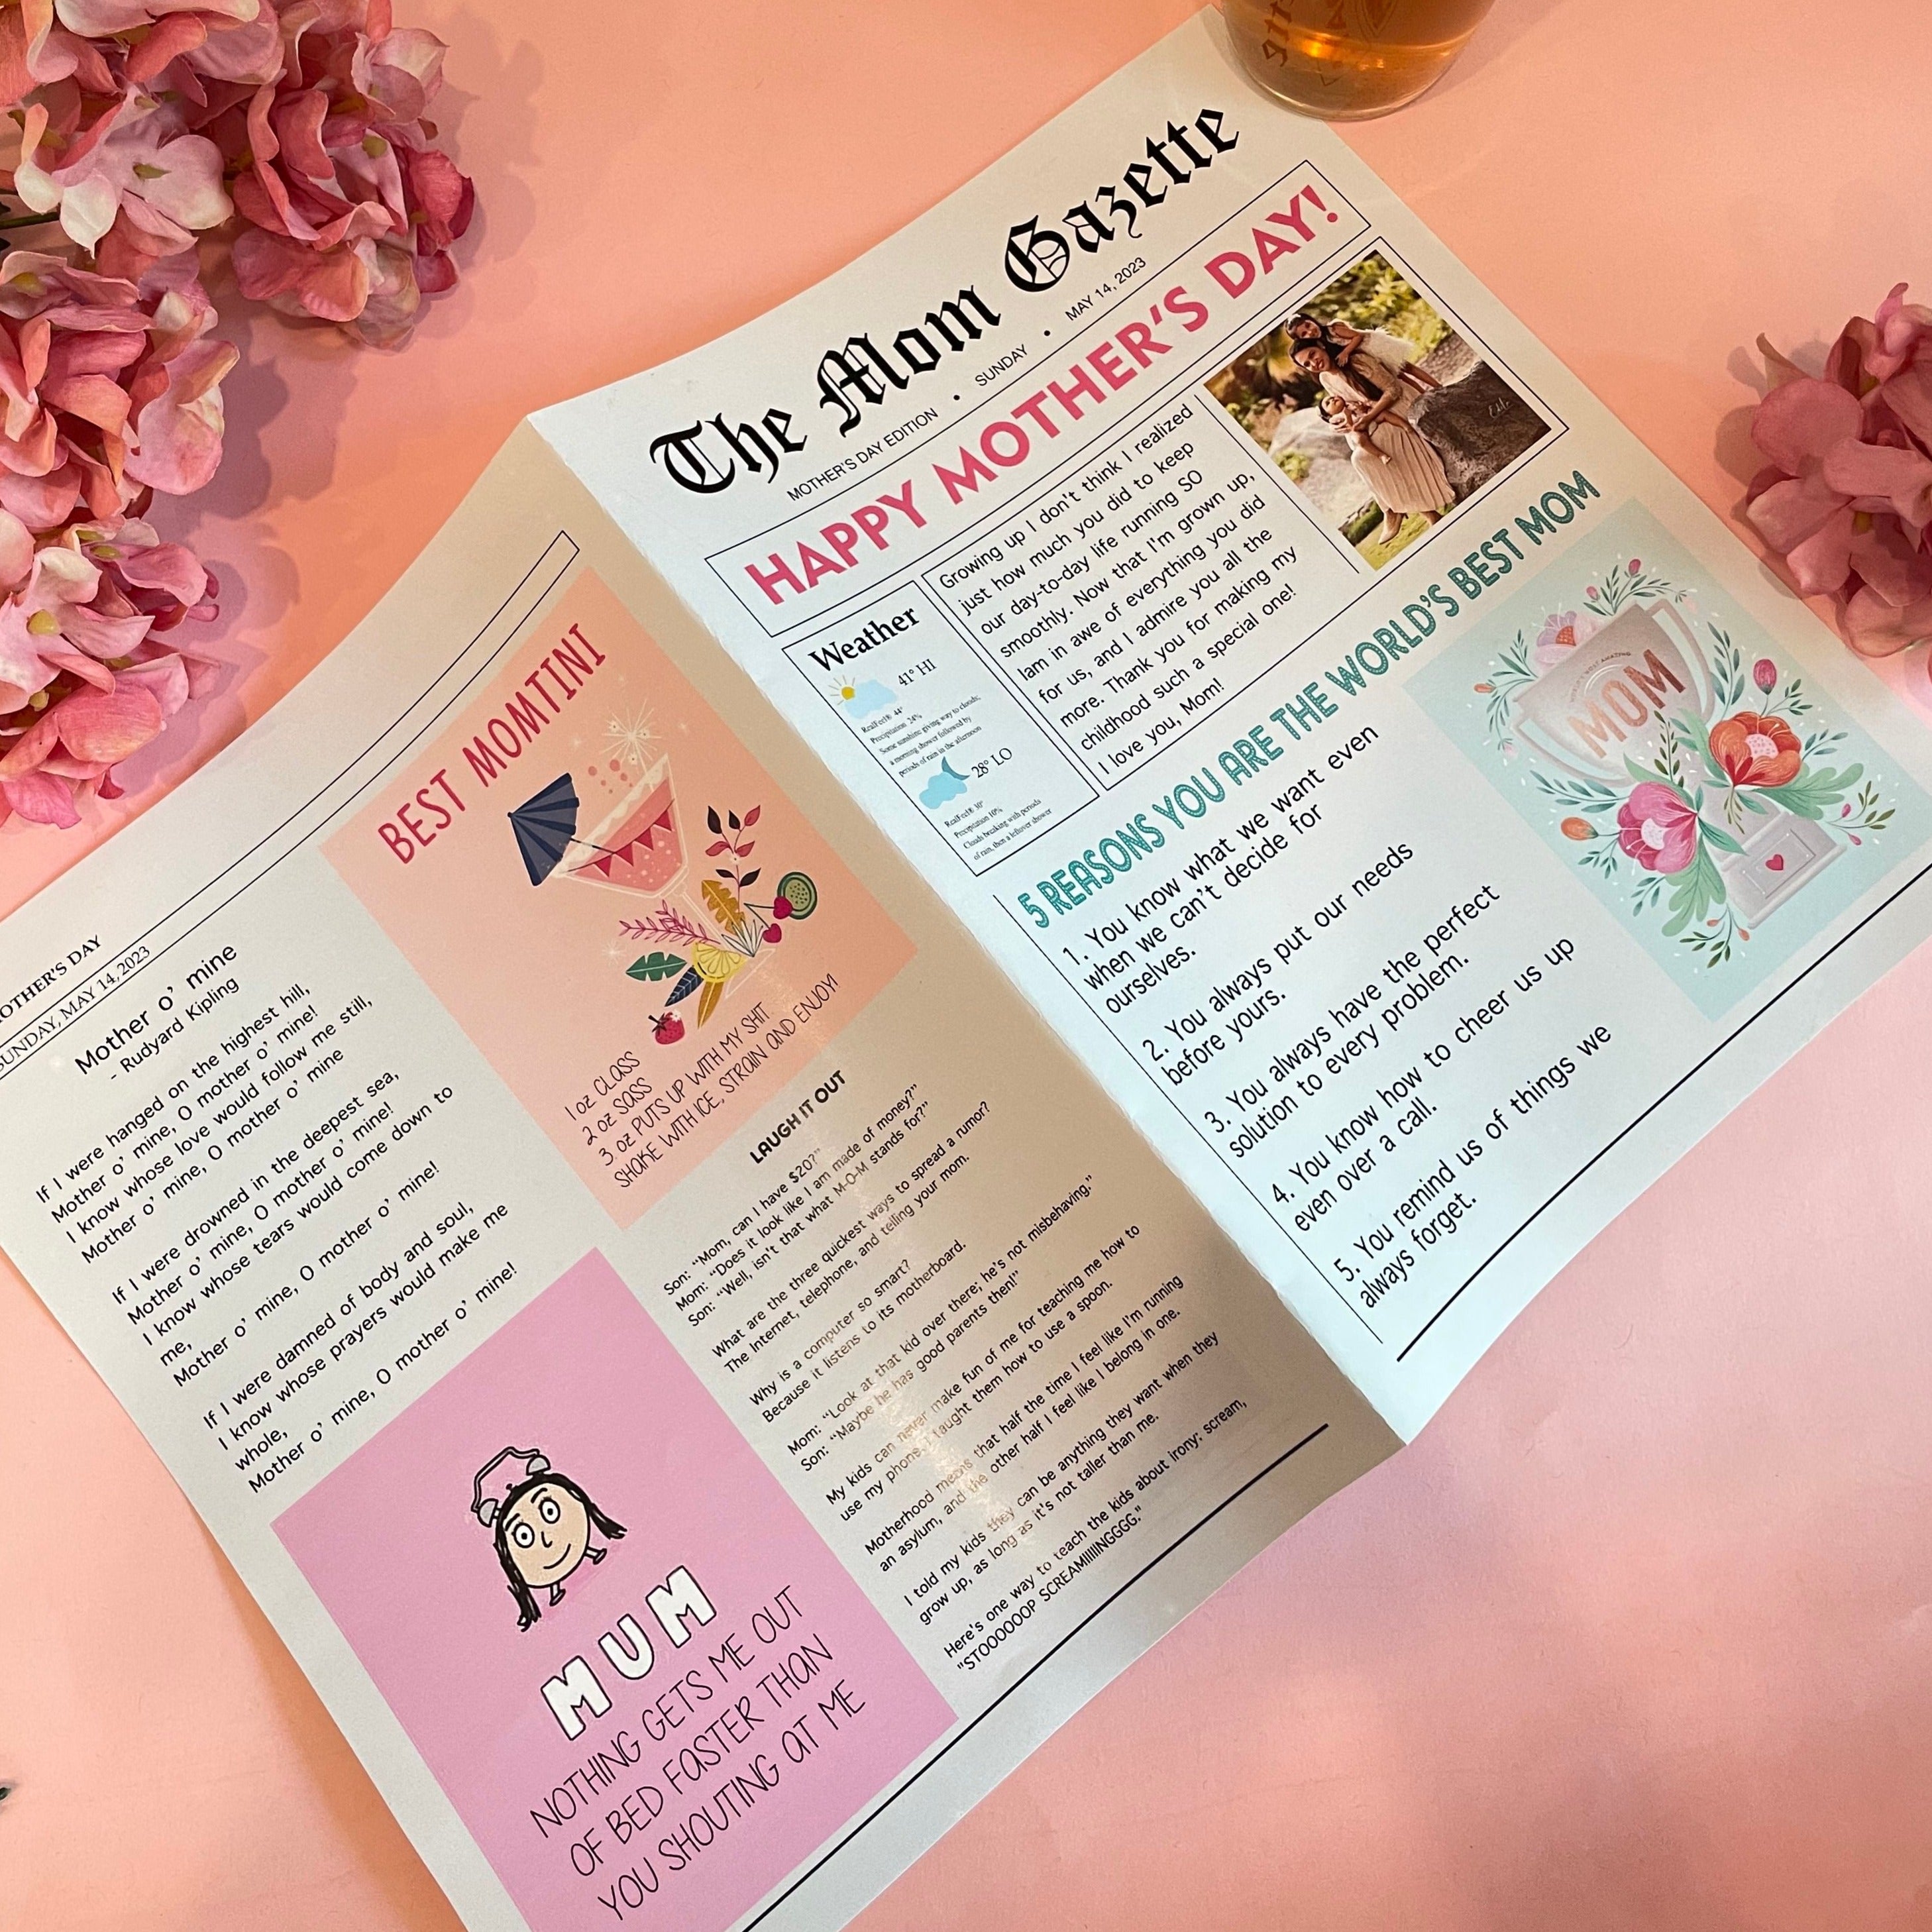 Personalized Newspaper